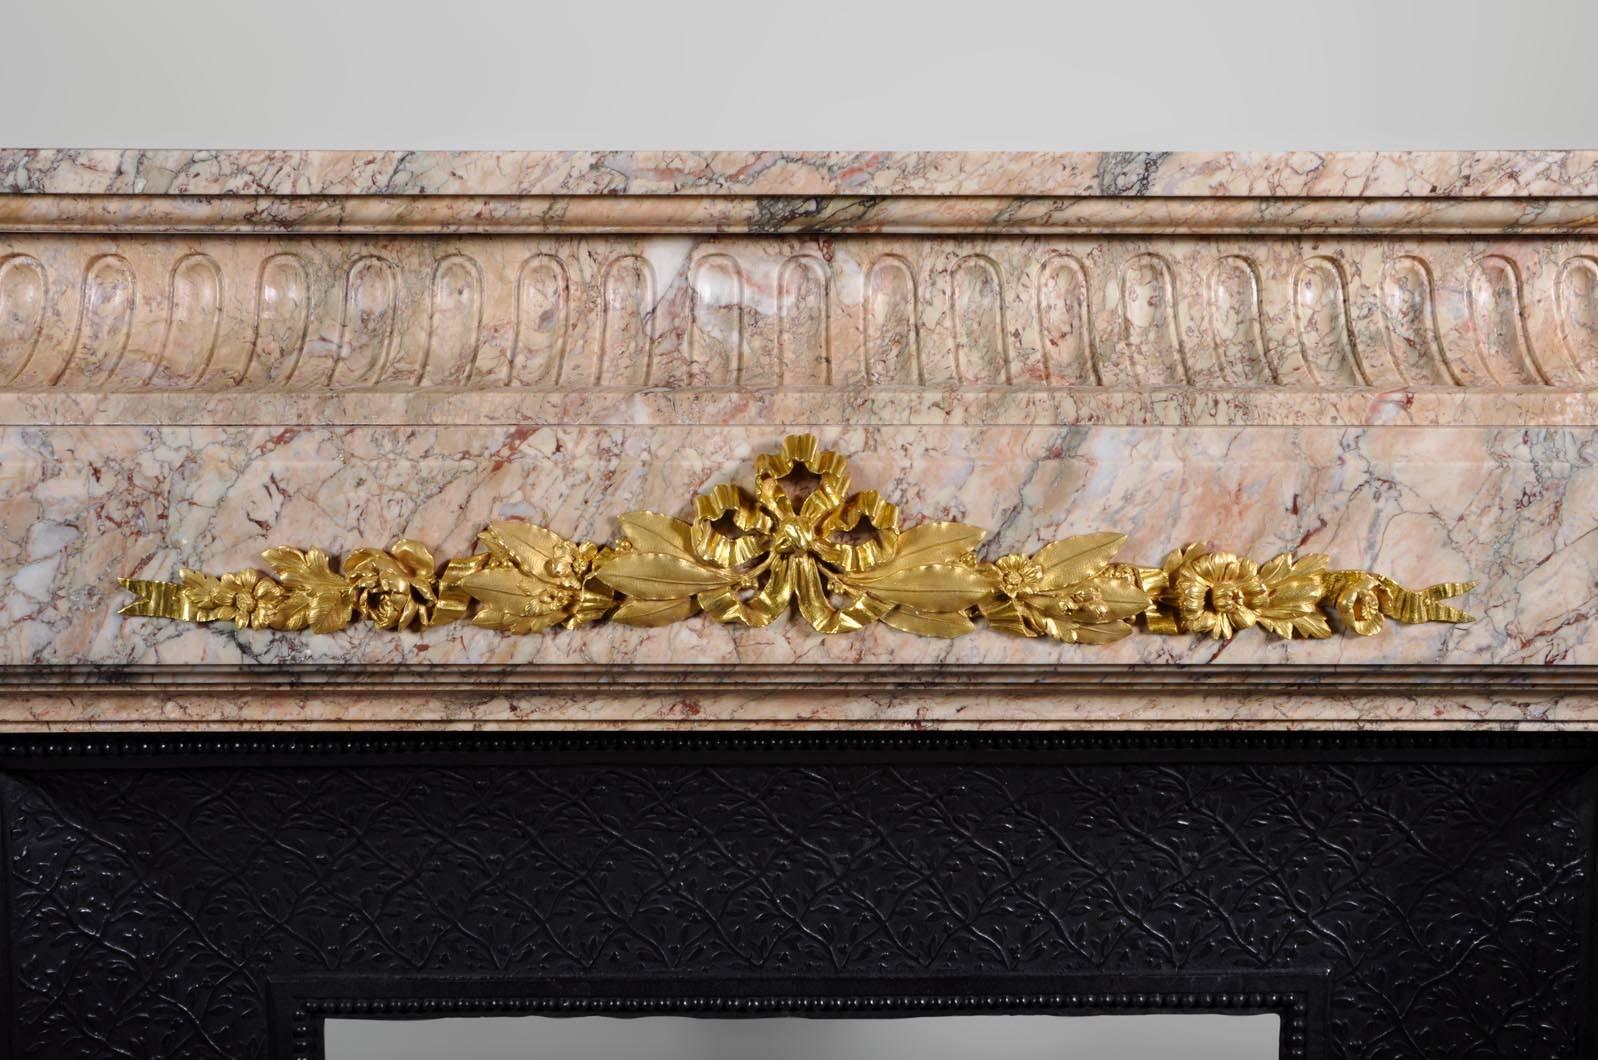 This antique Napoleon III style fireplace was sculpted in pink veined marble. The frieze and both jambs are decorated with gilded bronze ornaments representing flowers and foliages. The fireplace comes with its original cast iron insert.